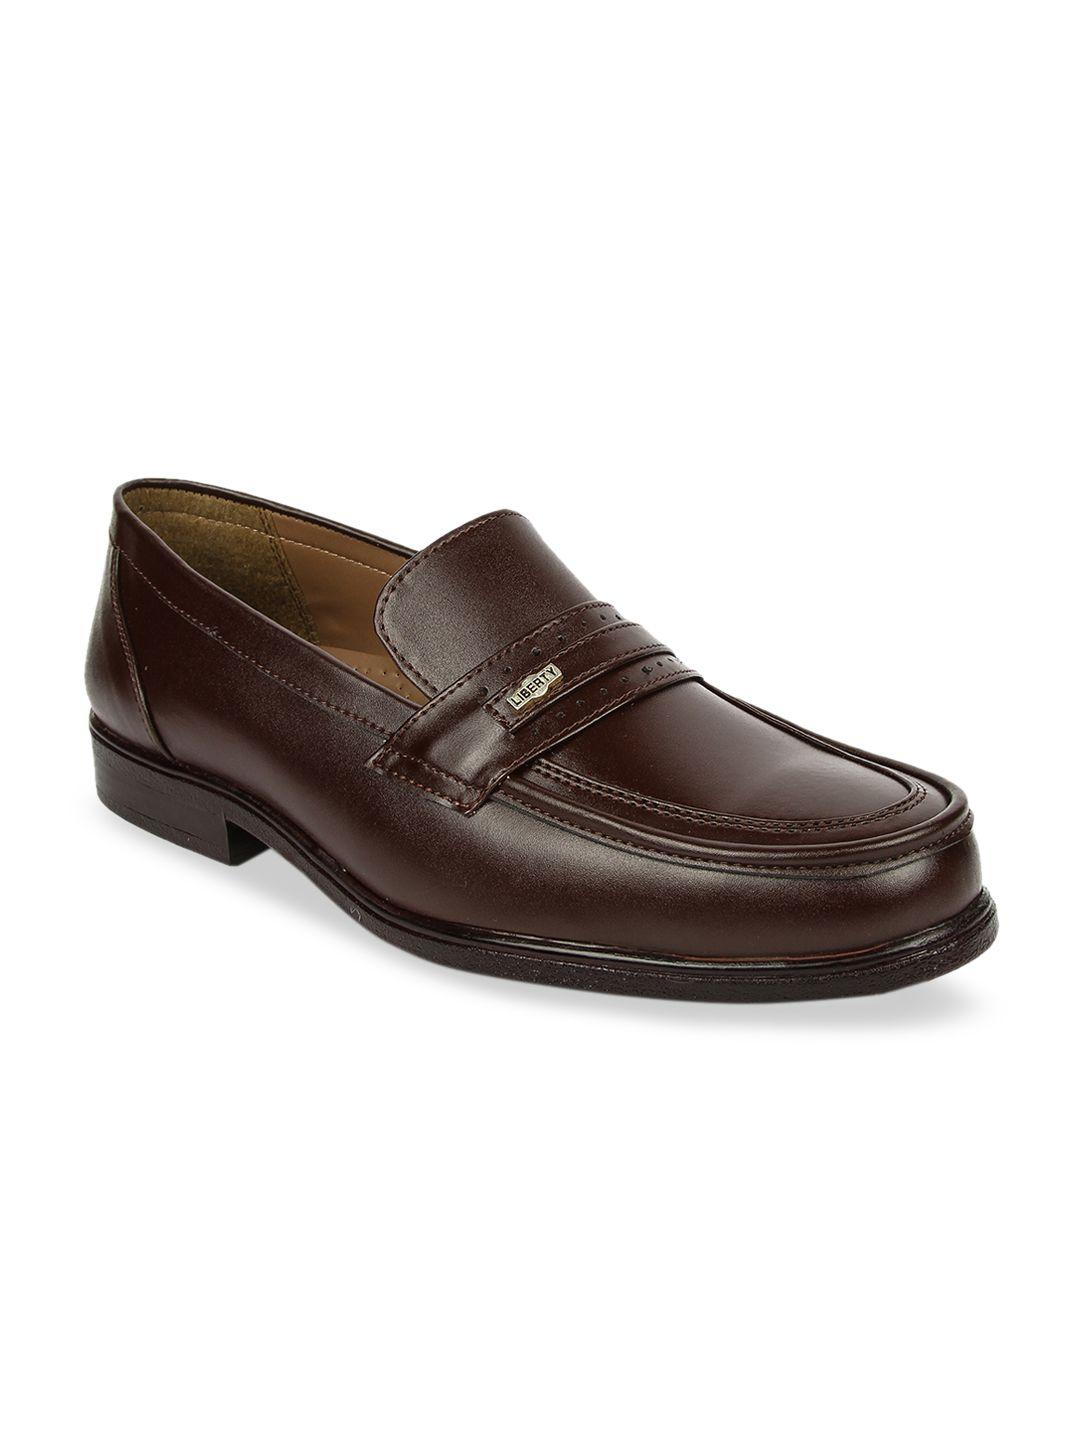 liberty-men-brown-solid-leather-formal-loafers